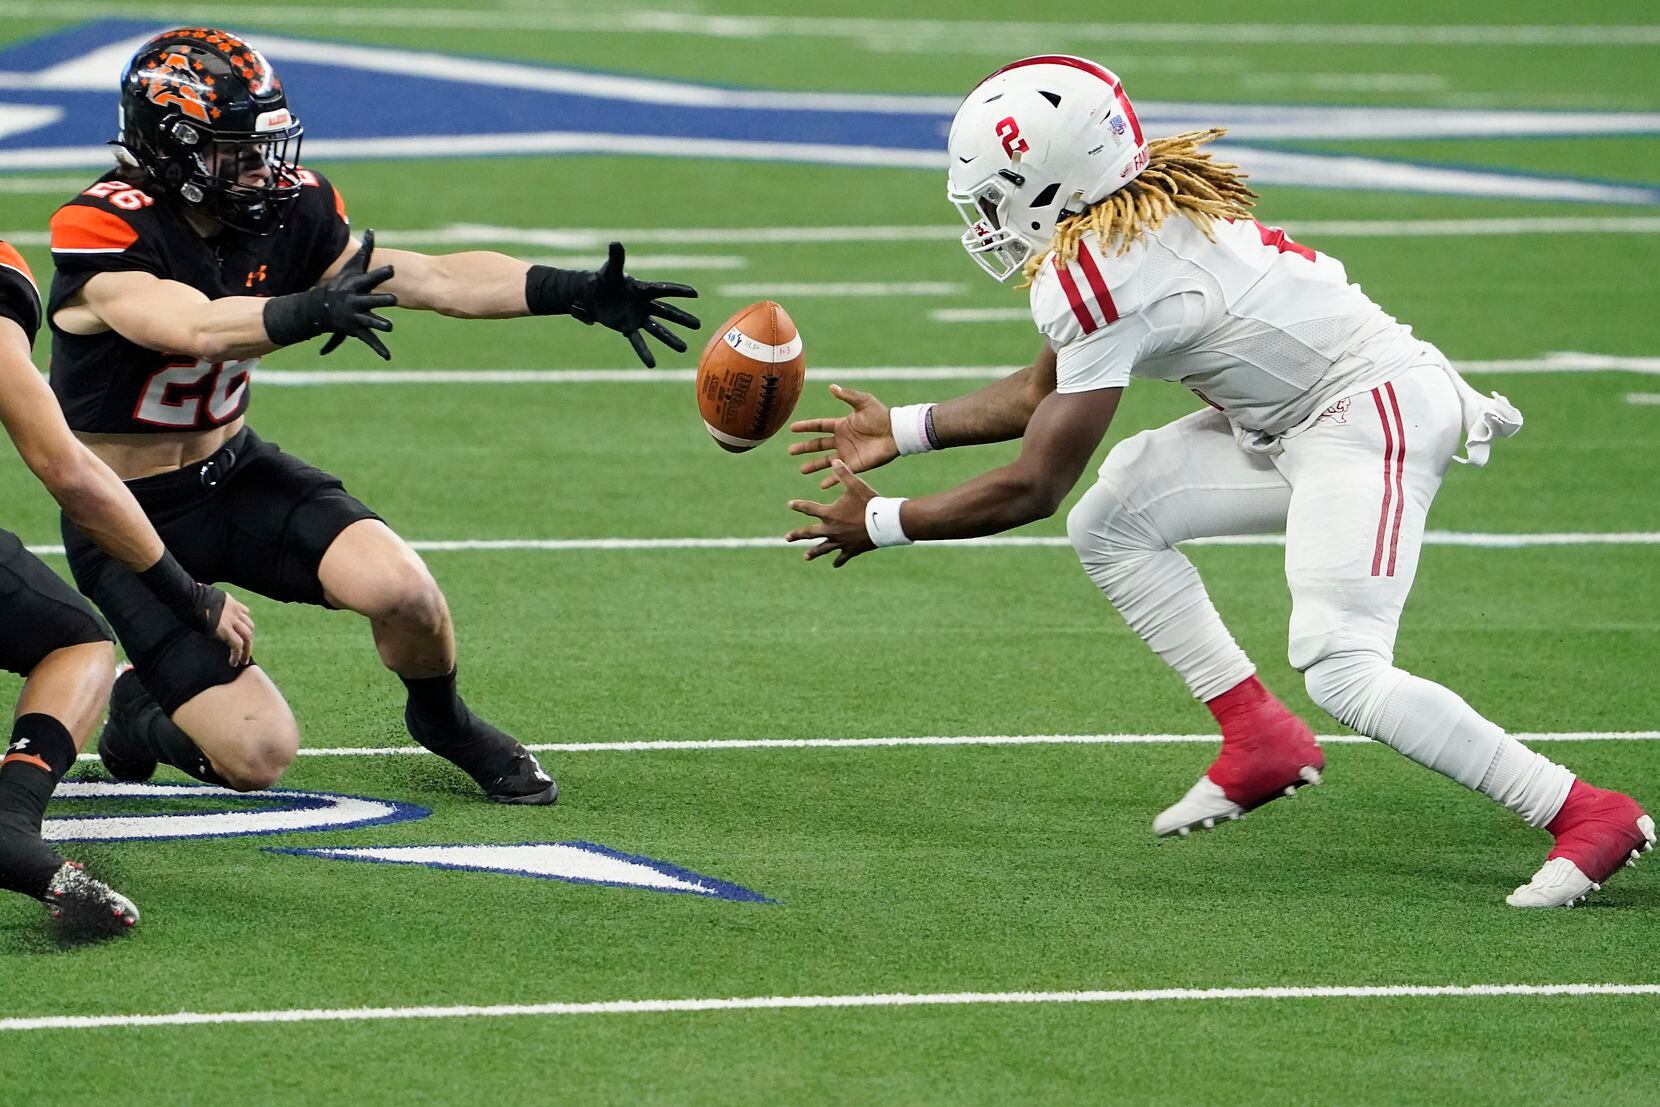 Crosby Deniquez Dunn (2) reaches to recover his own fumble against Aledo Sammy Steffe (26) during the first half of the Class 5A Division II state football championship game at AT&T Stadium on Friday, Jan. 15, 2021, in Arlington. (Smiley N. Pool/The Dallas Morning News)